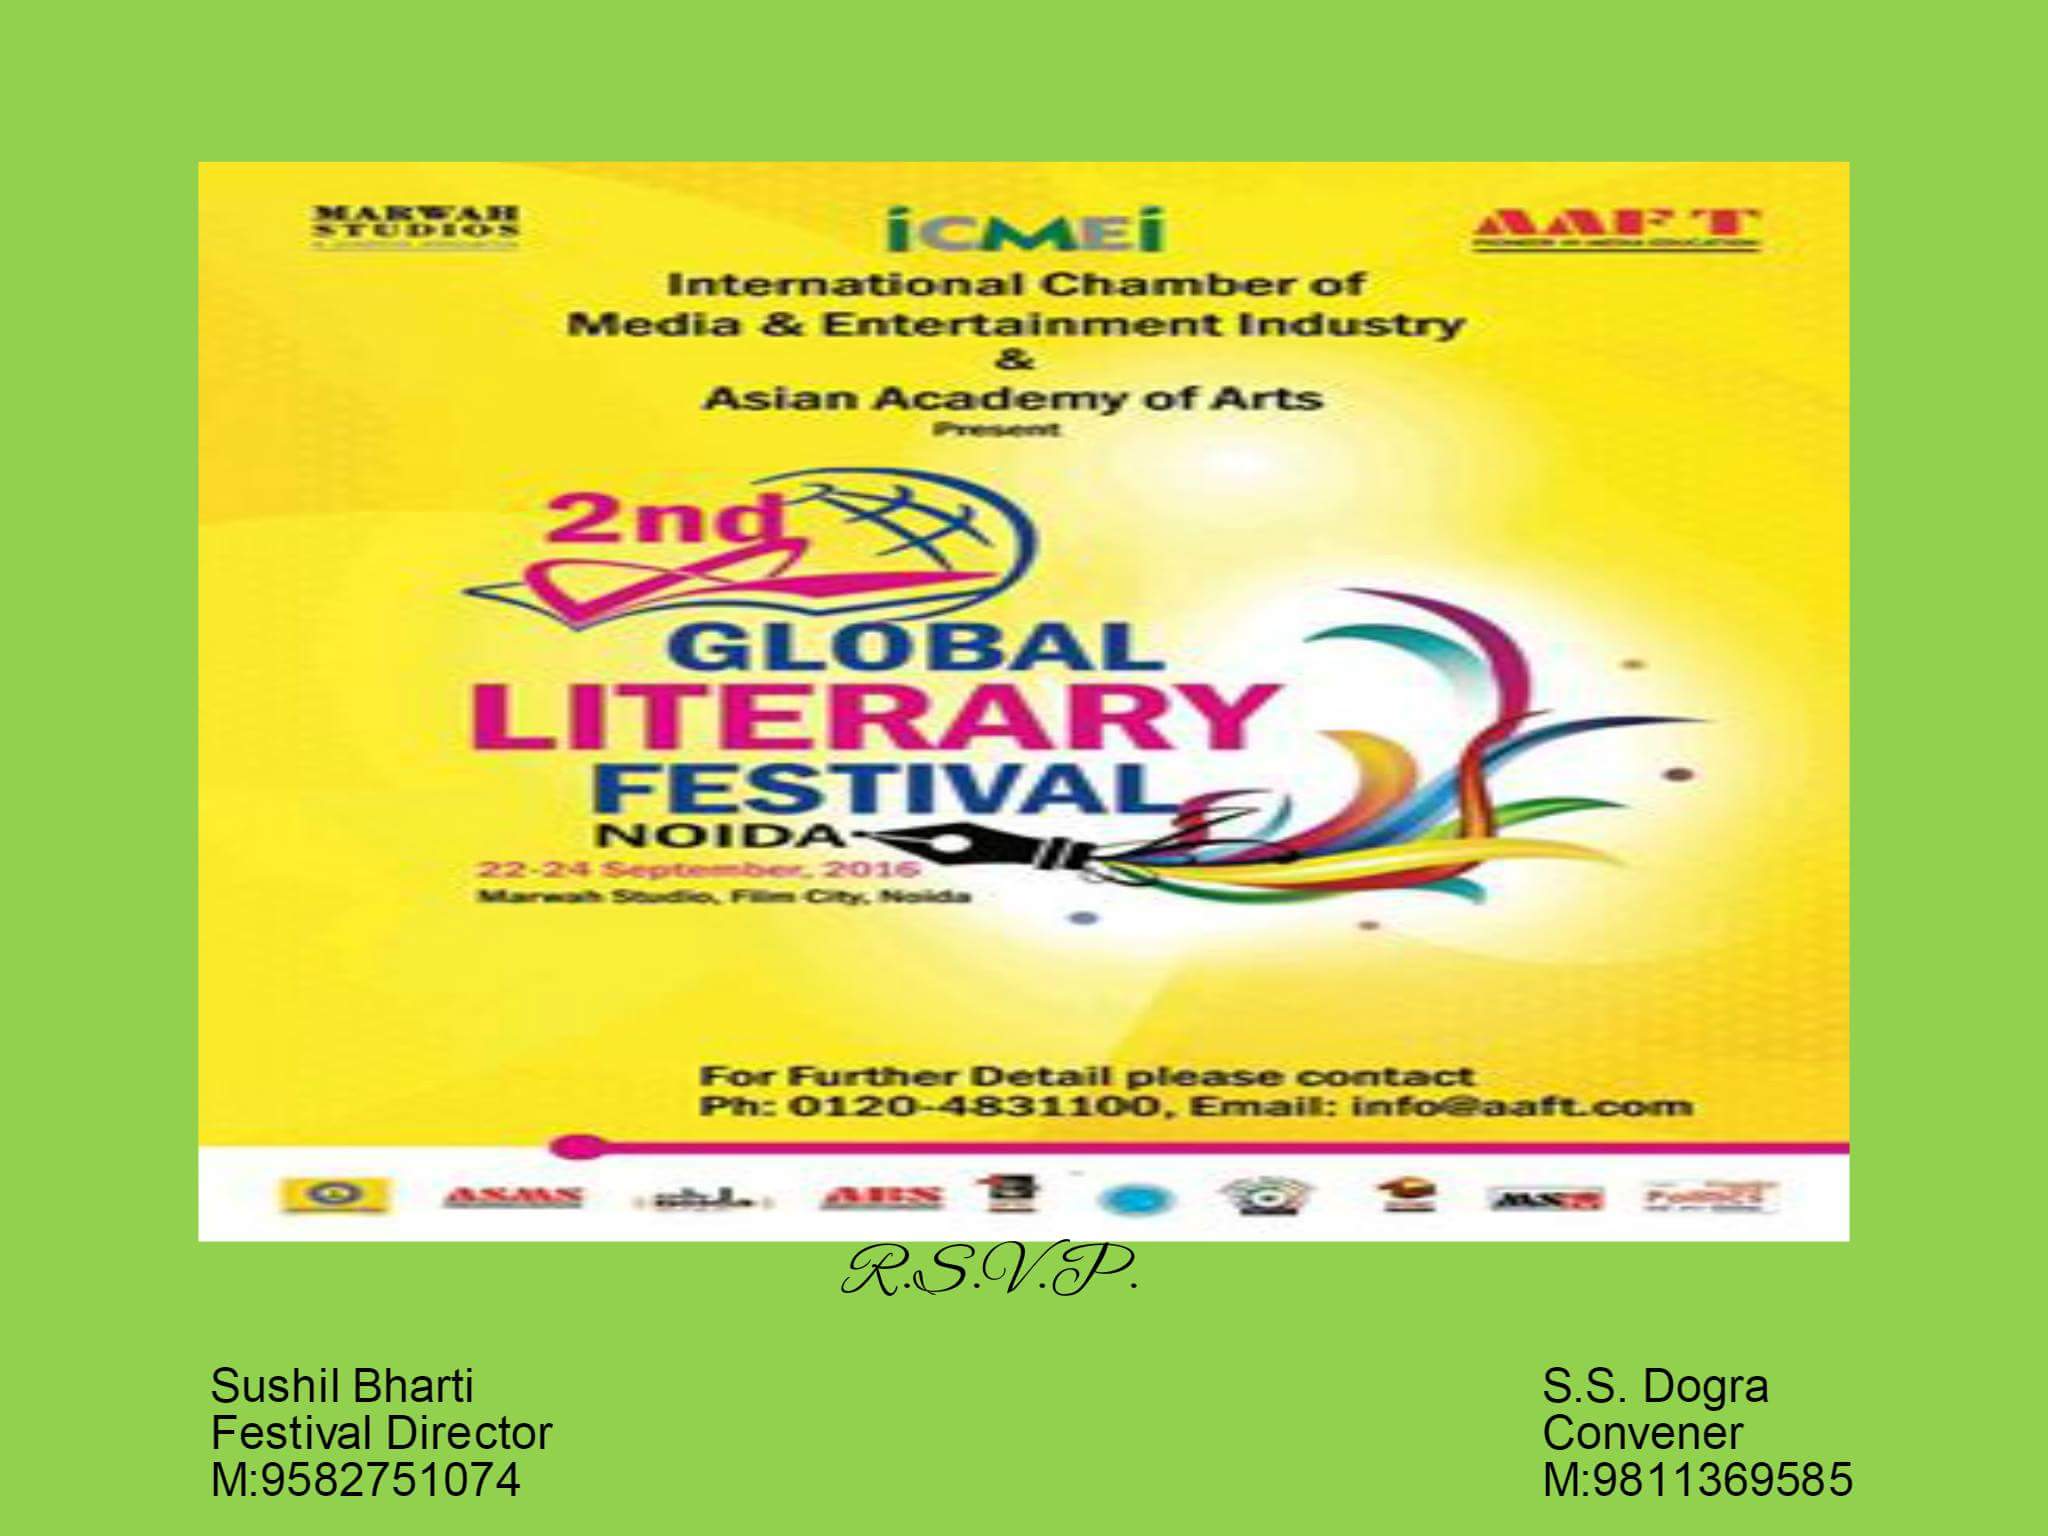 The 2nd Global Literary Festival from 22 to 24th of Sept 2016 at Film City, Noida